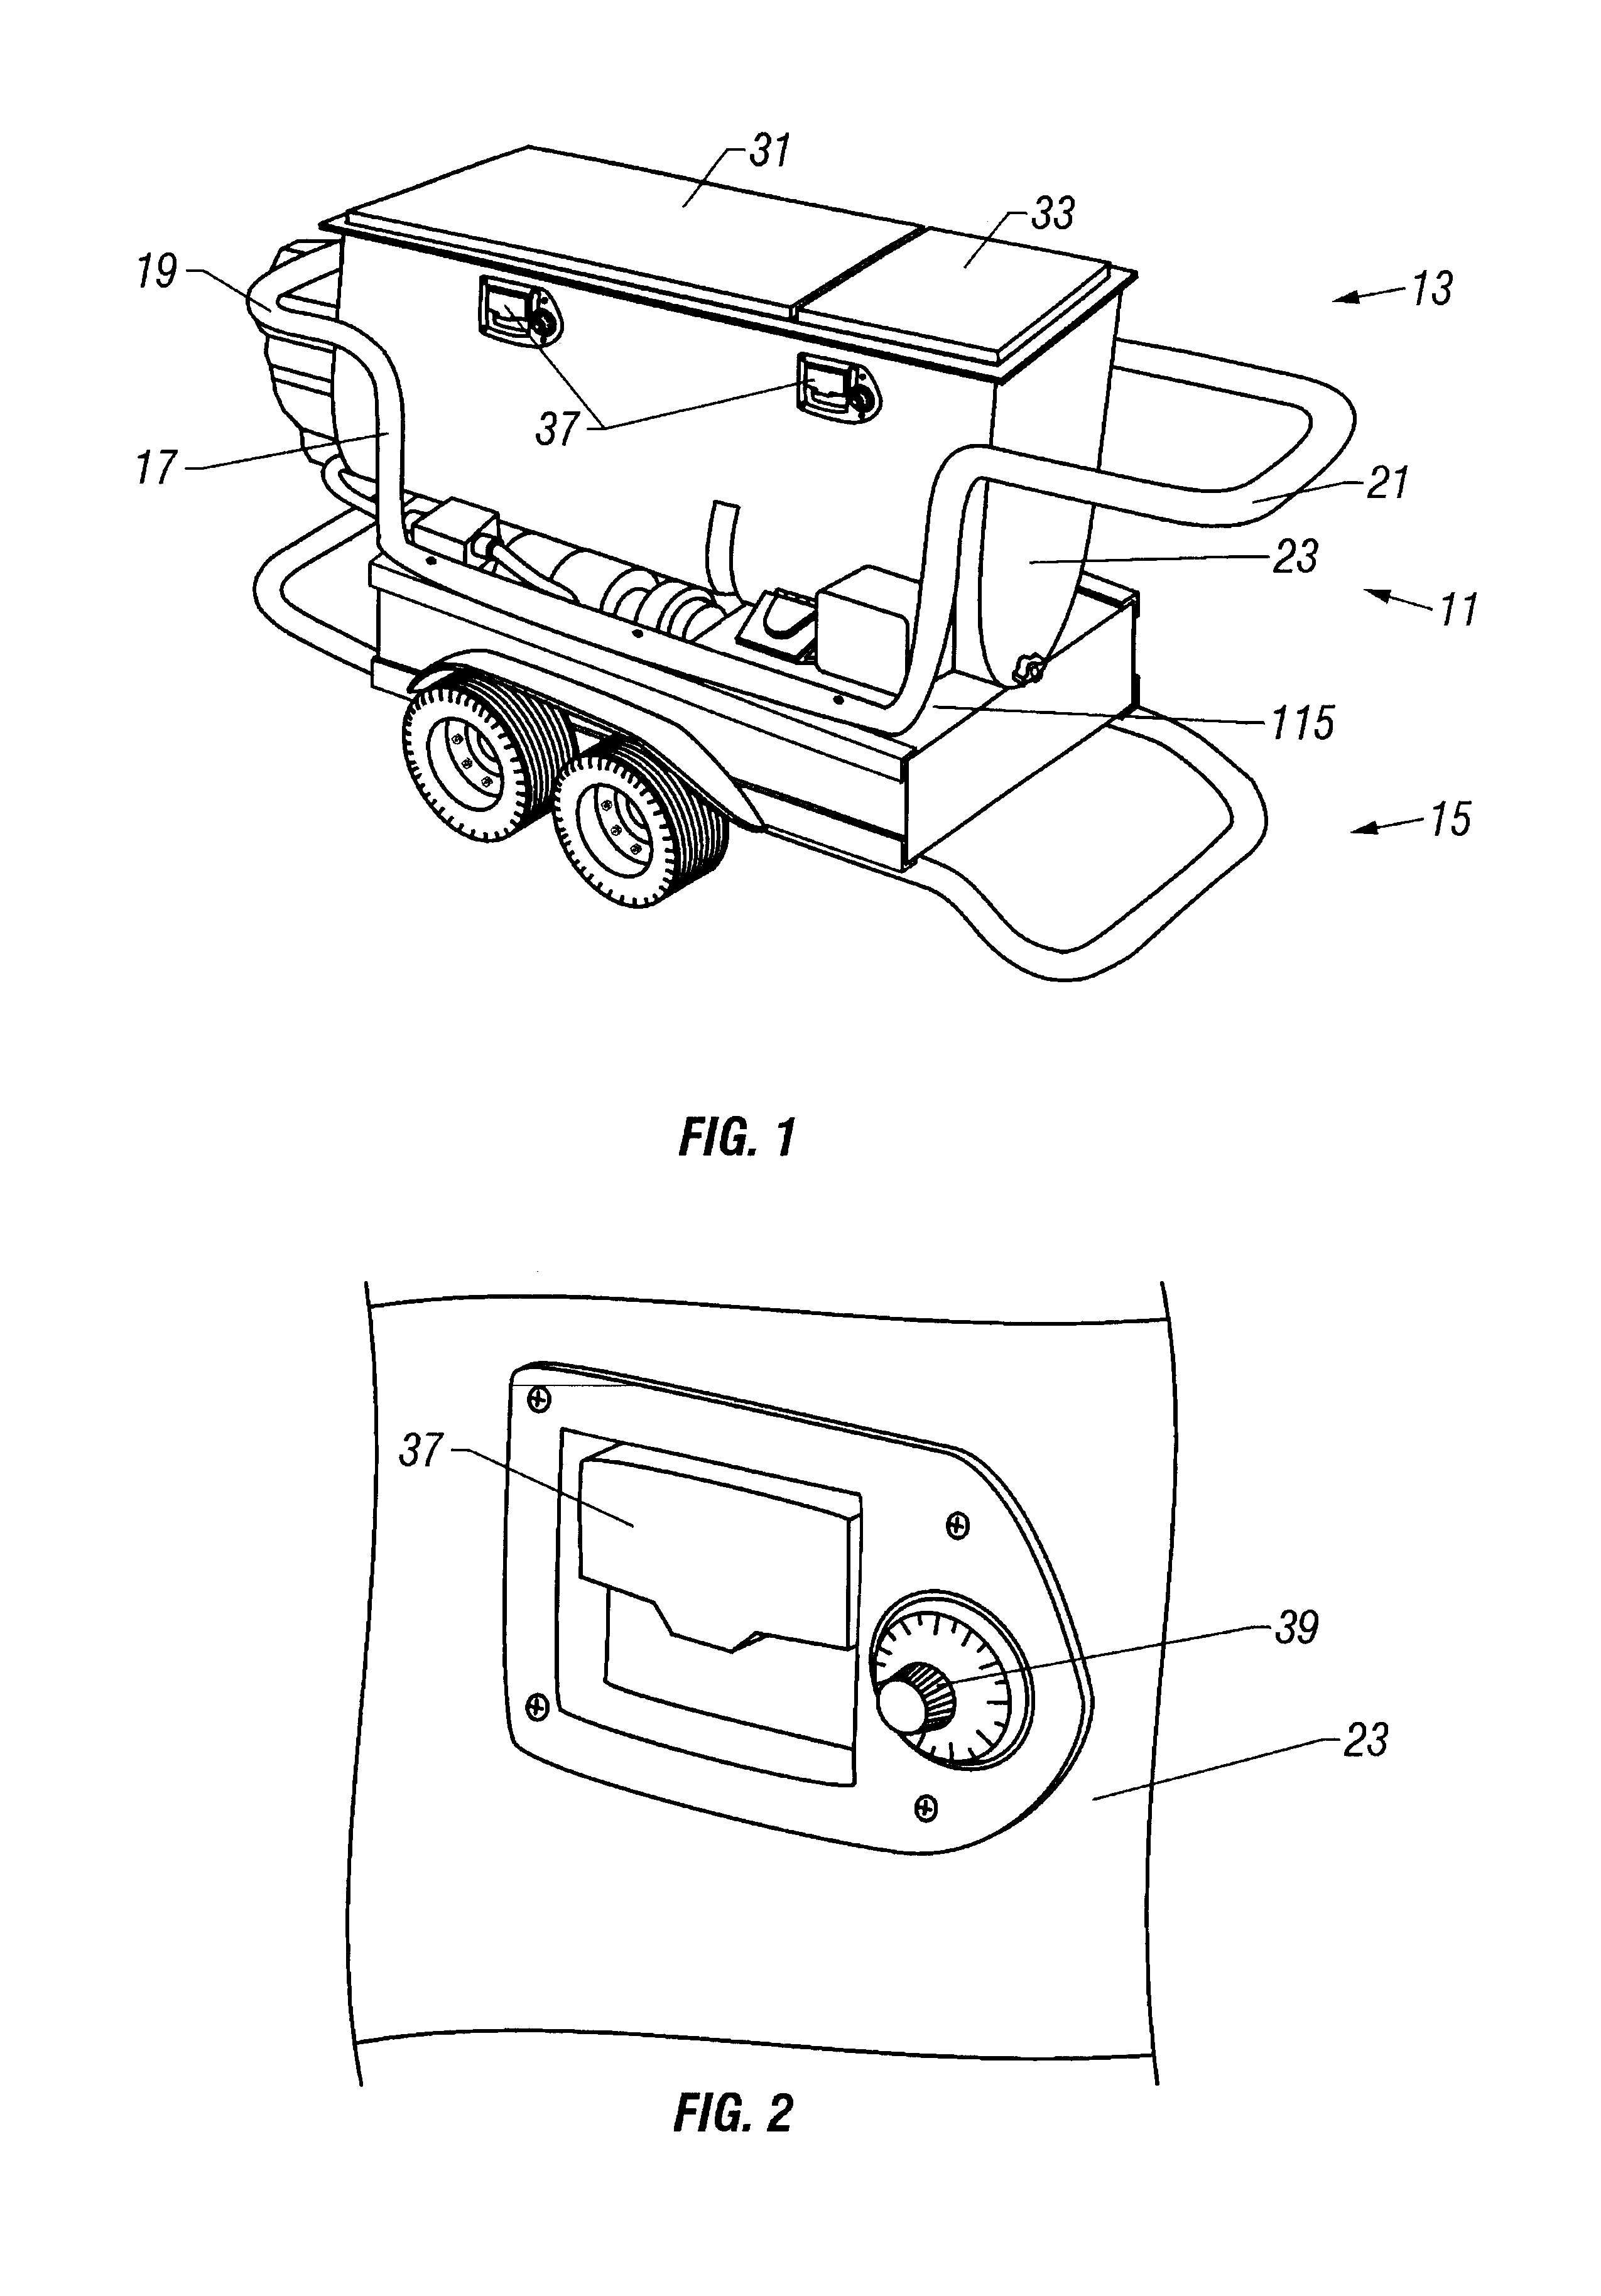 Apparatus for automated finishing of interior surfaces